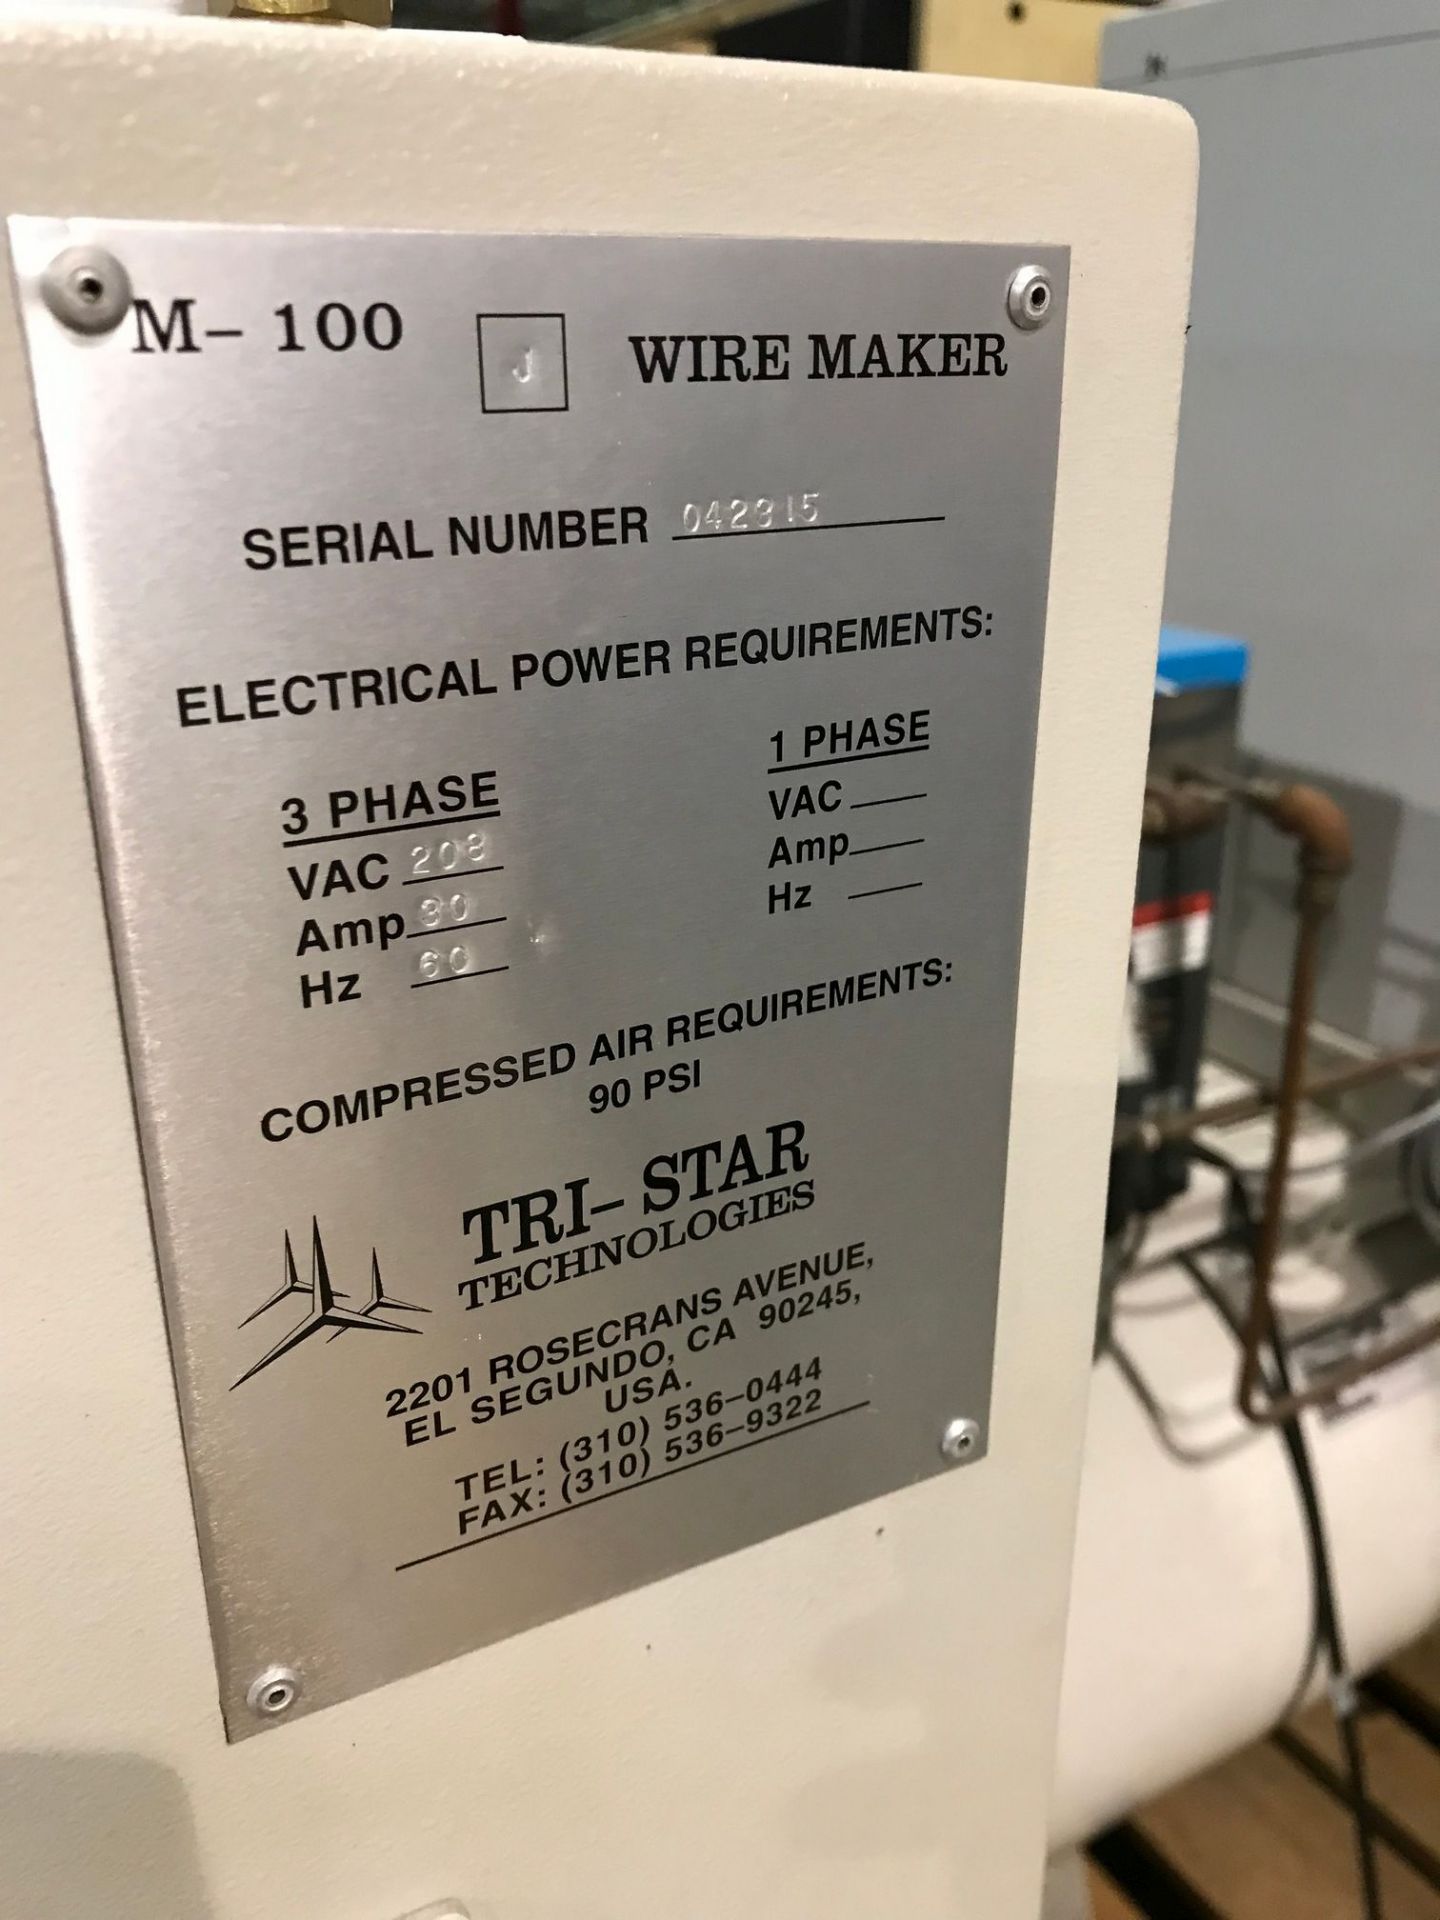 TRI-STAR M-100J WIRE MARKER; S/N 042315, WITH PC AND PLASMA TREATMENT STATION; FA 50067-1 - Image 4 of 11